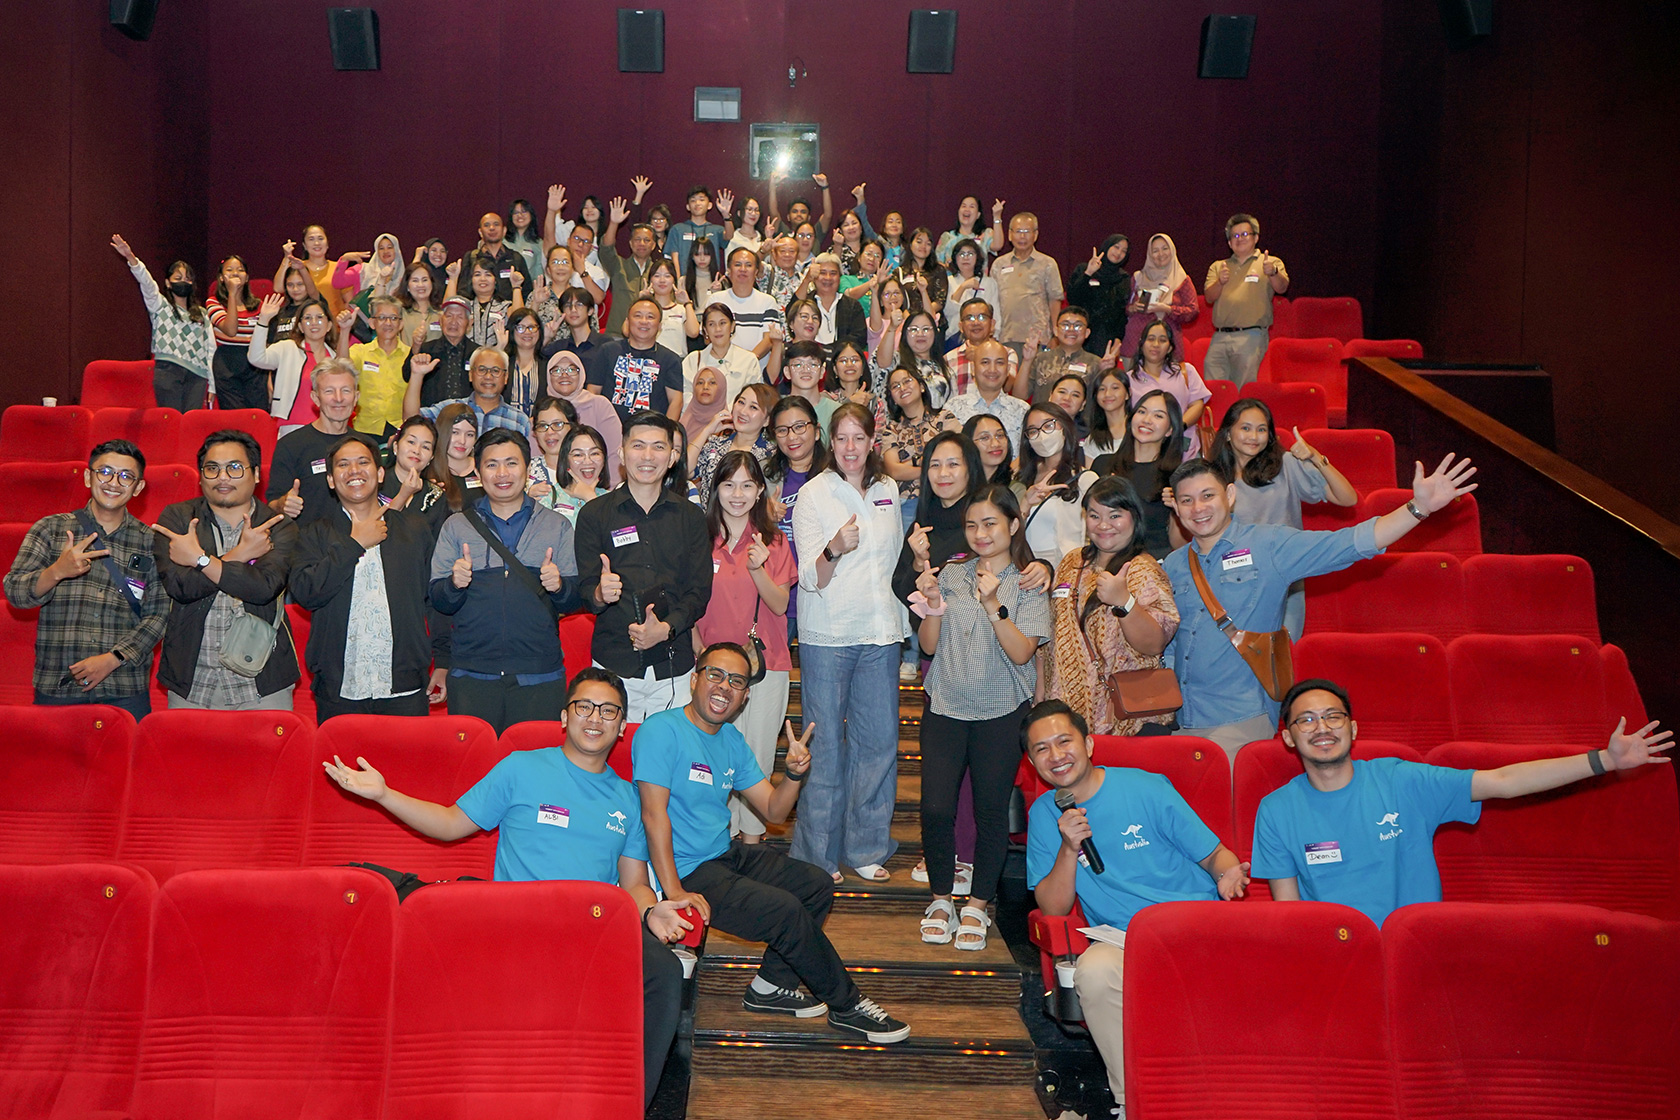 Approximately 90 participants, including Australian alumni and their friends and family, attend the 'Nobar' with OzAlum event in Manado to watch the Australian film “Blueback”.